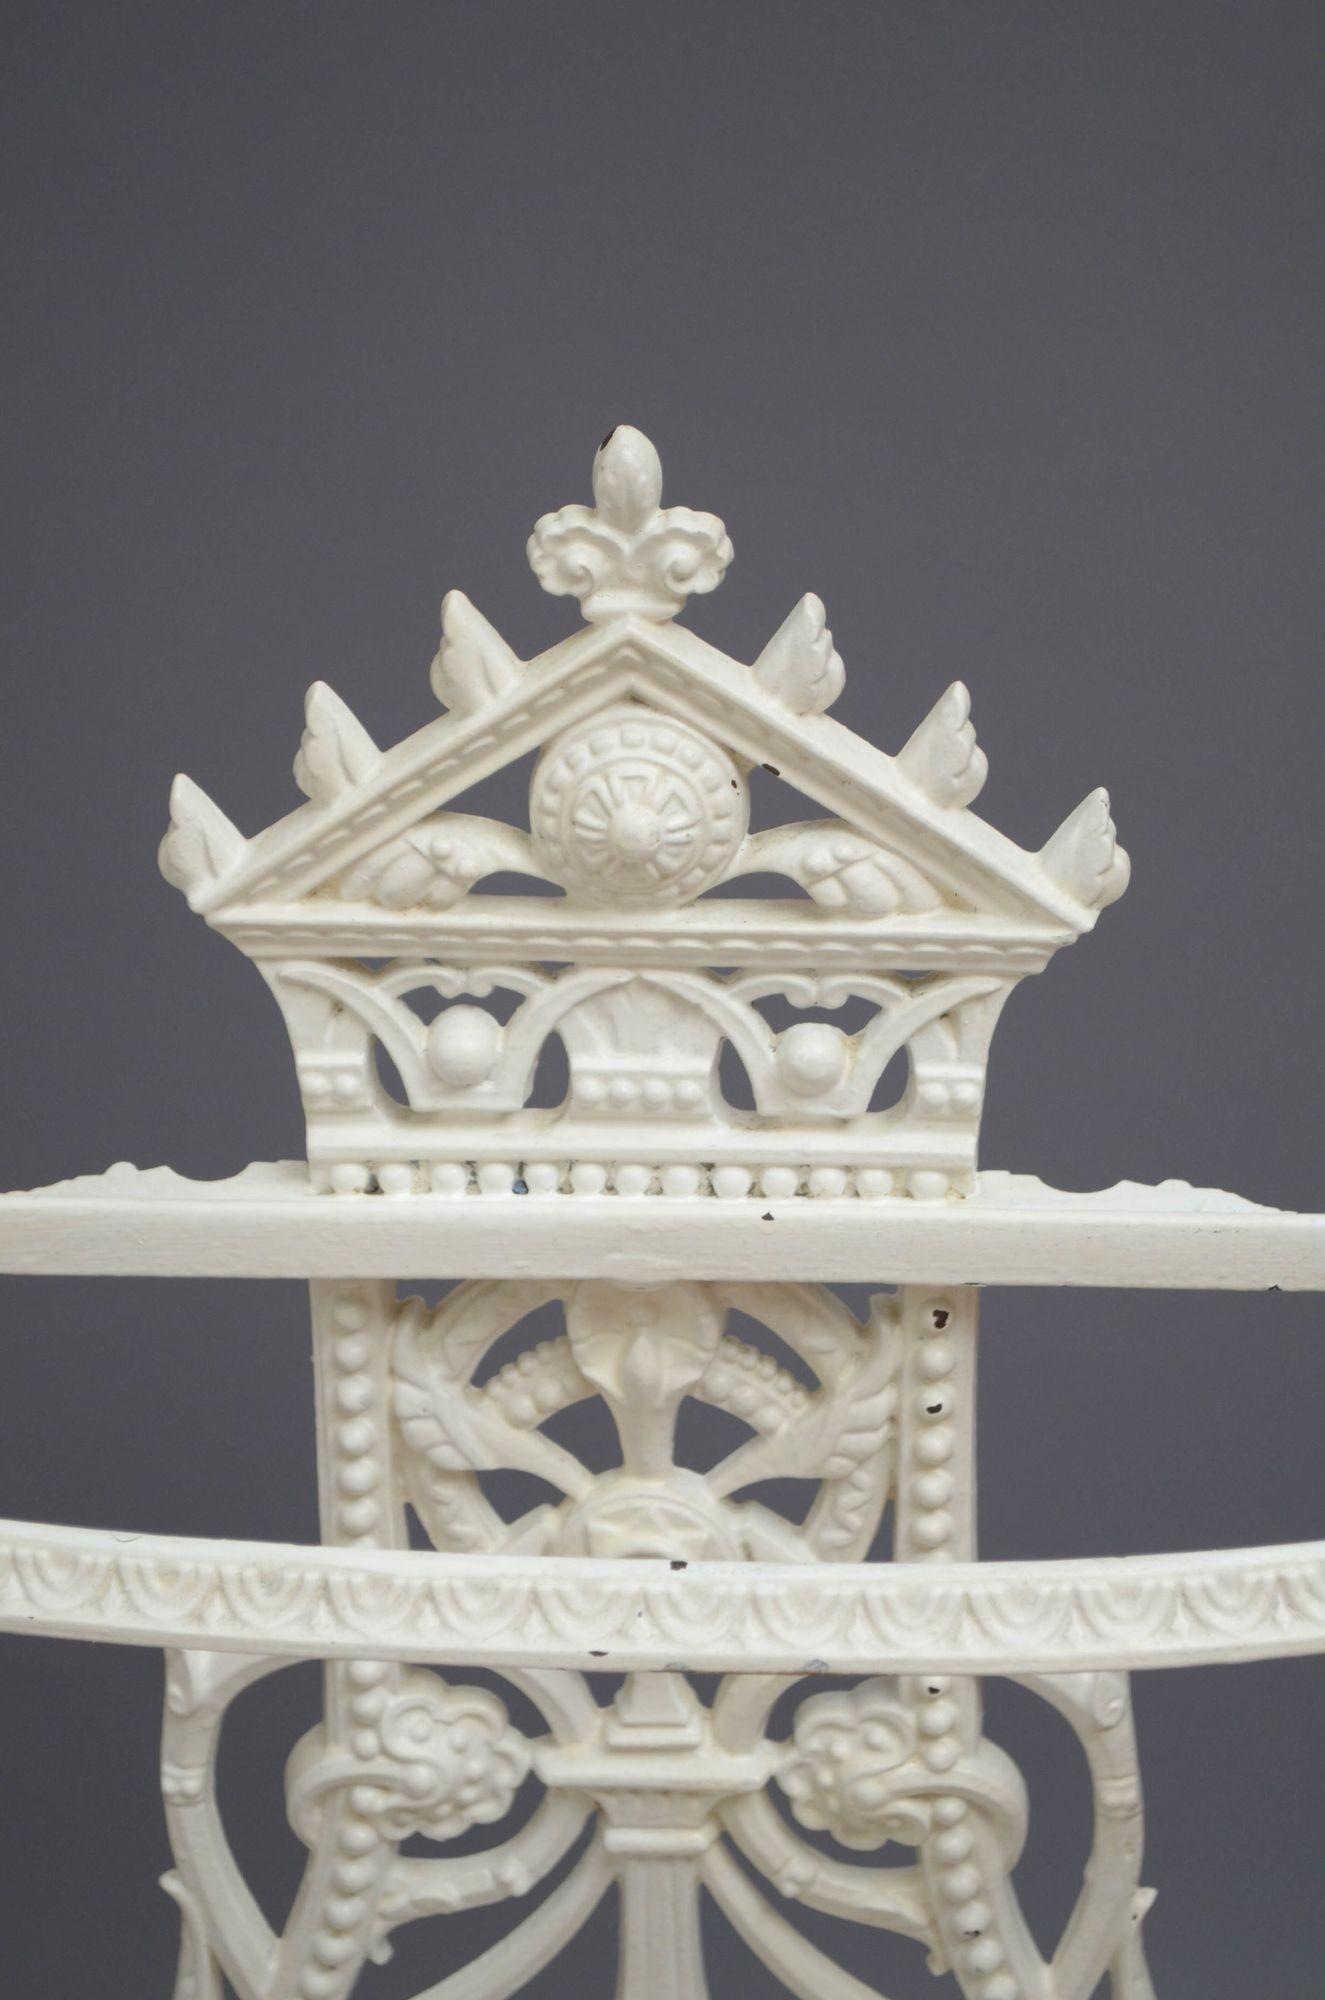 Sn5195 Aesthetic Movement cast iron umbrella stand / walking stick stand in the manner of Christopher Dresser with intricate pierced design and shell shaped removable drip tray. All in home ready conation. circa 1880
H27.5